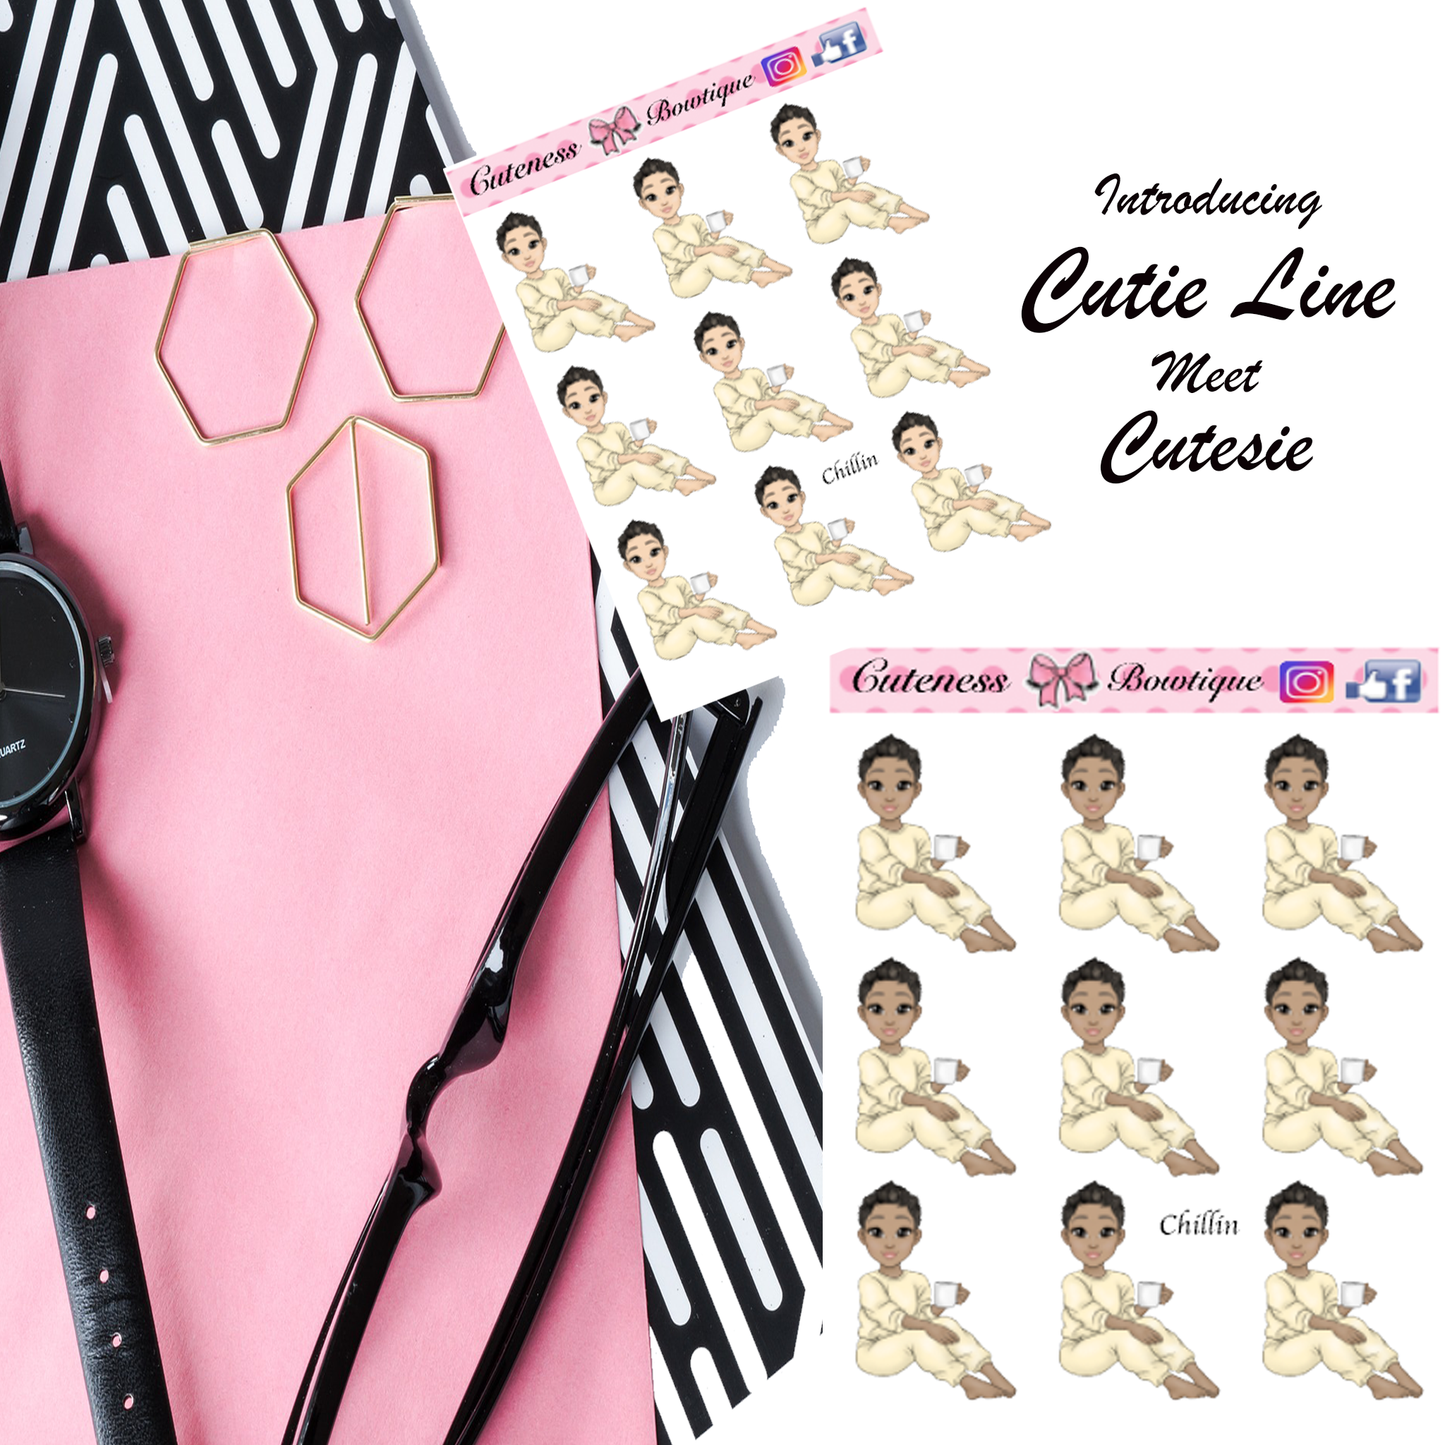 The Cutie Line Icon Sticker Sheet | Cuteness Planner Stickers for Agendas, Planners, Notebooks, Dividers | CHILLIN